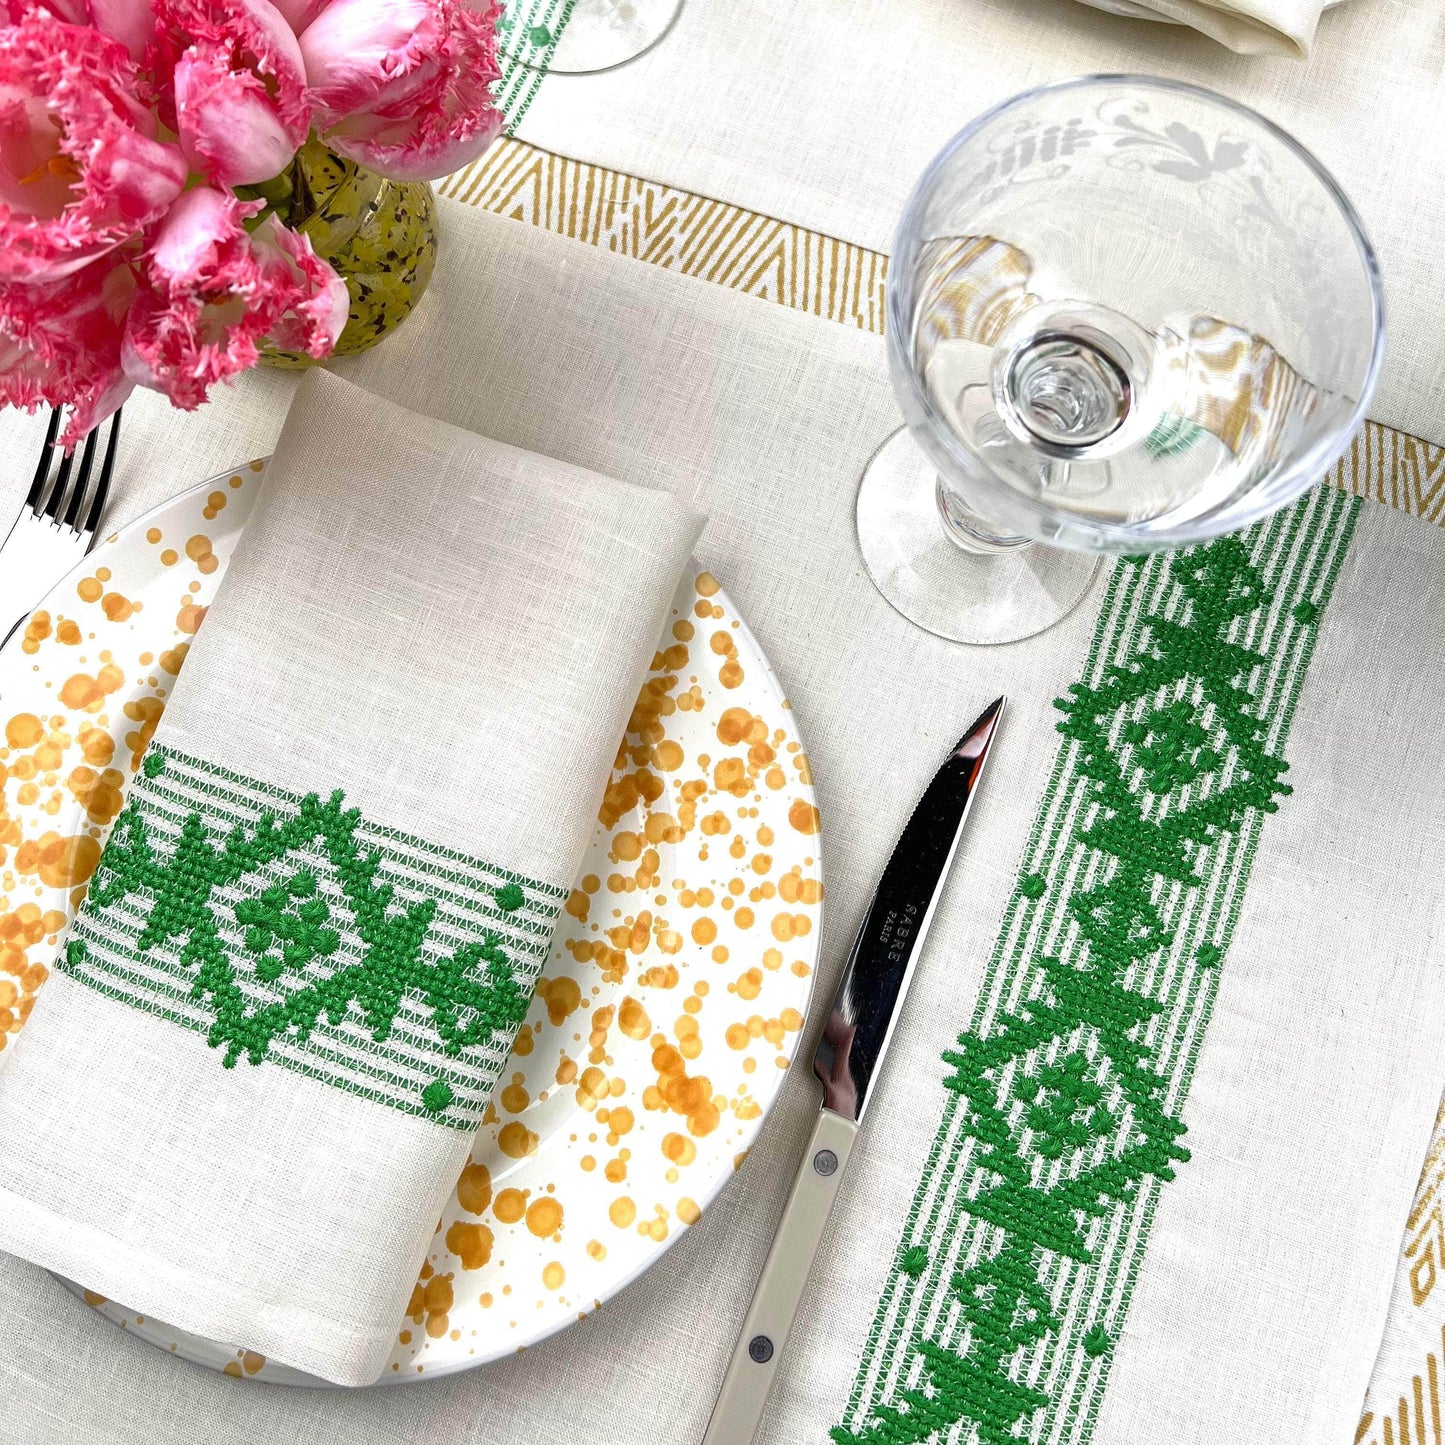 The Folklore Napkin & Placemat Set in Ivory & Shamrock Green | One Napkin and One Placemat